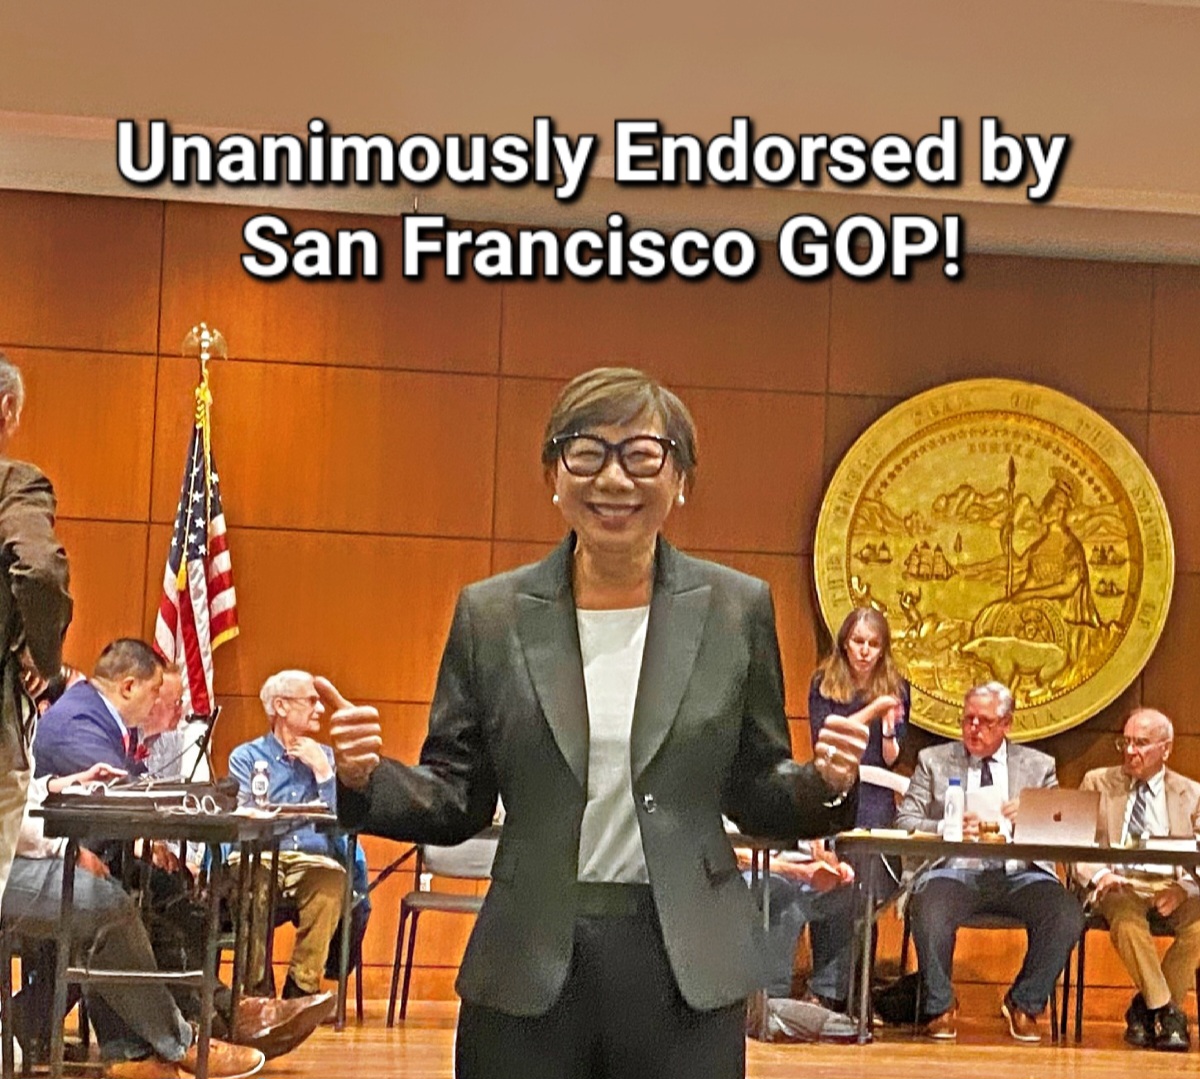 Another win for my campaign for Congress CD-15! 
The Bay Area agrees, we need change for the better! 

#californiarepublican #californiapolitics #Republicans #bayarea #bayarearepublican #congress #annackramer4congress